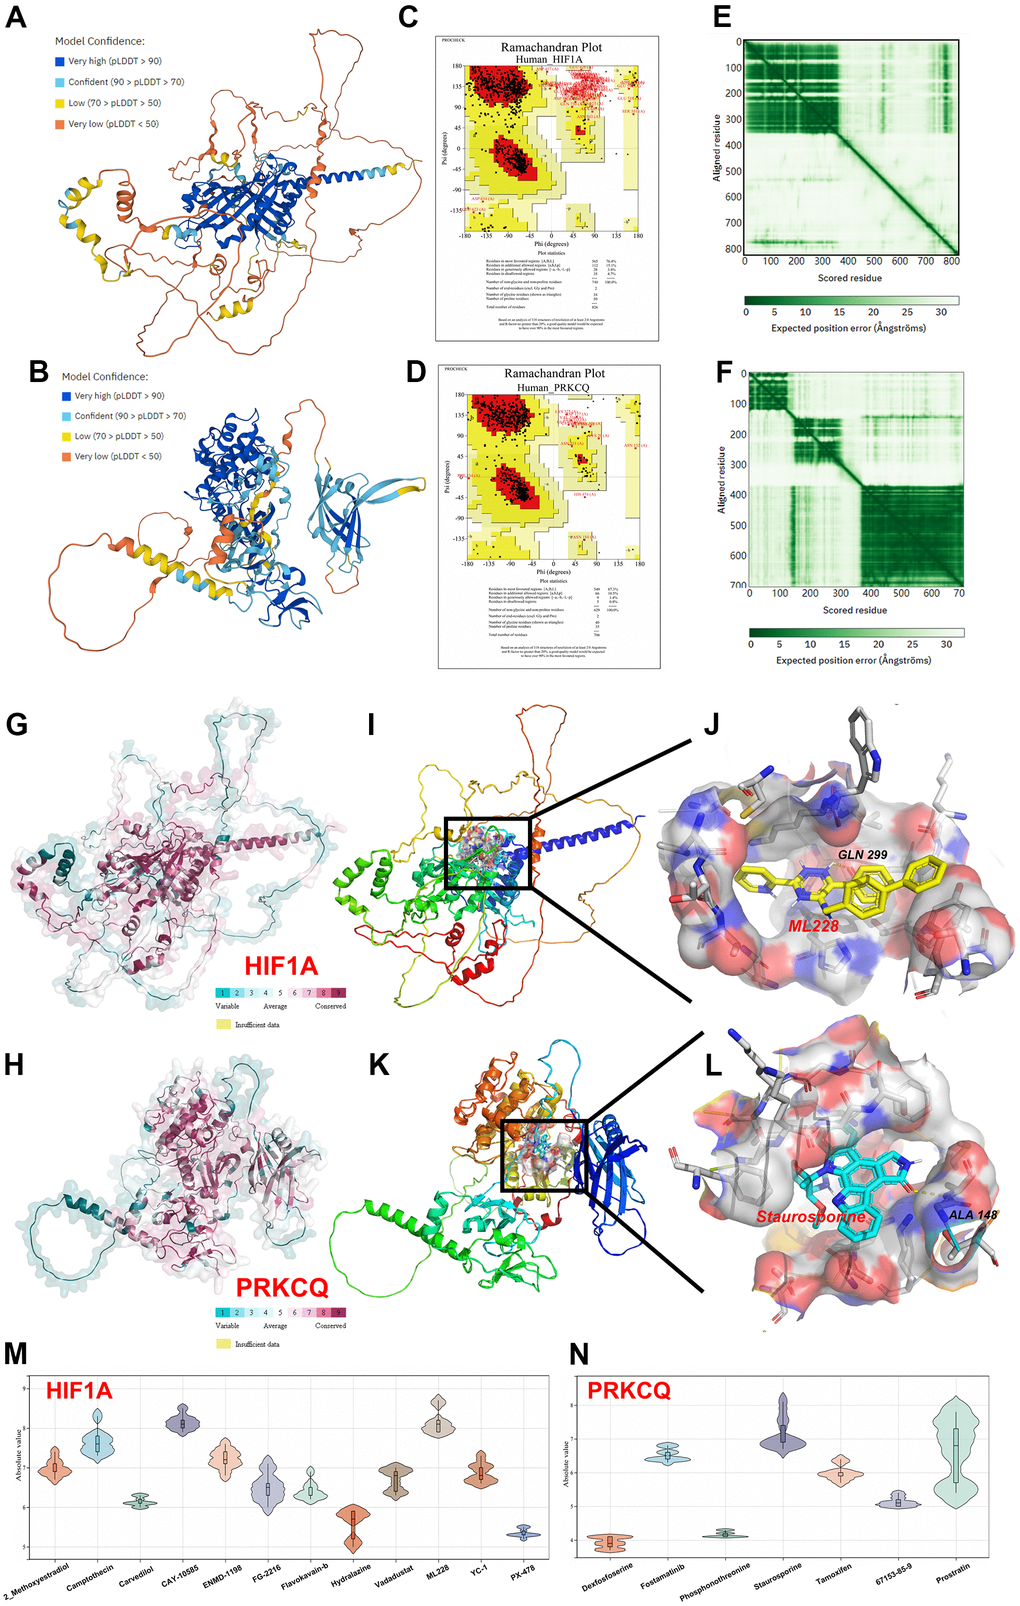 Homology modeling and molecular docking. The crystal structure and evaluation of (A) HIF1A and (B) PQKCQ. The ramachandran plot of (C) HIF1A structure. The ramachandran plot of (D) PQKCQ structure. The LDDT score of (E) HIF1A structure. The LDDT score of (F) PQKCQ structure. The assessment of protein conservation of HIF1A and PQKCQ was exhibited in (G, H) respectively. The best docking position between (I, J) ML228 and HIF1A or (K, L) staurosporine and PRKCQ were indicated. The absolute value of affinity between predicated small molecules and (M) HIF1A or (N) PQKCQ was shown.